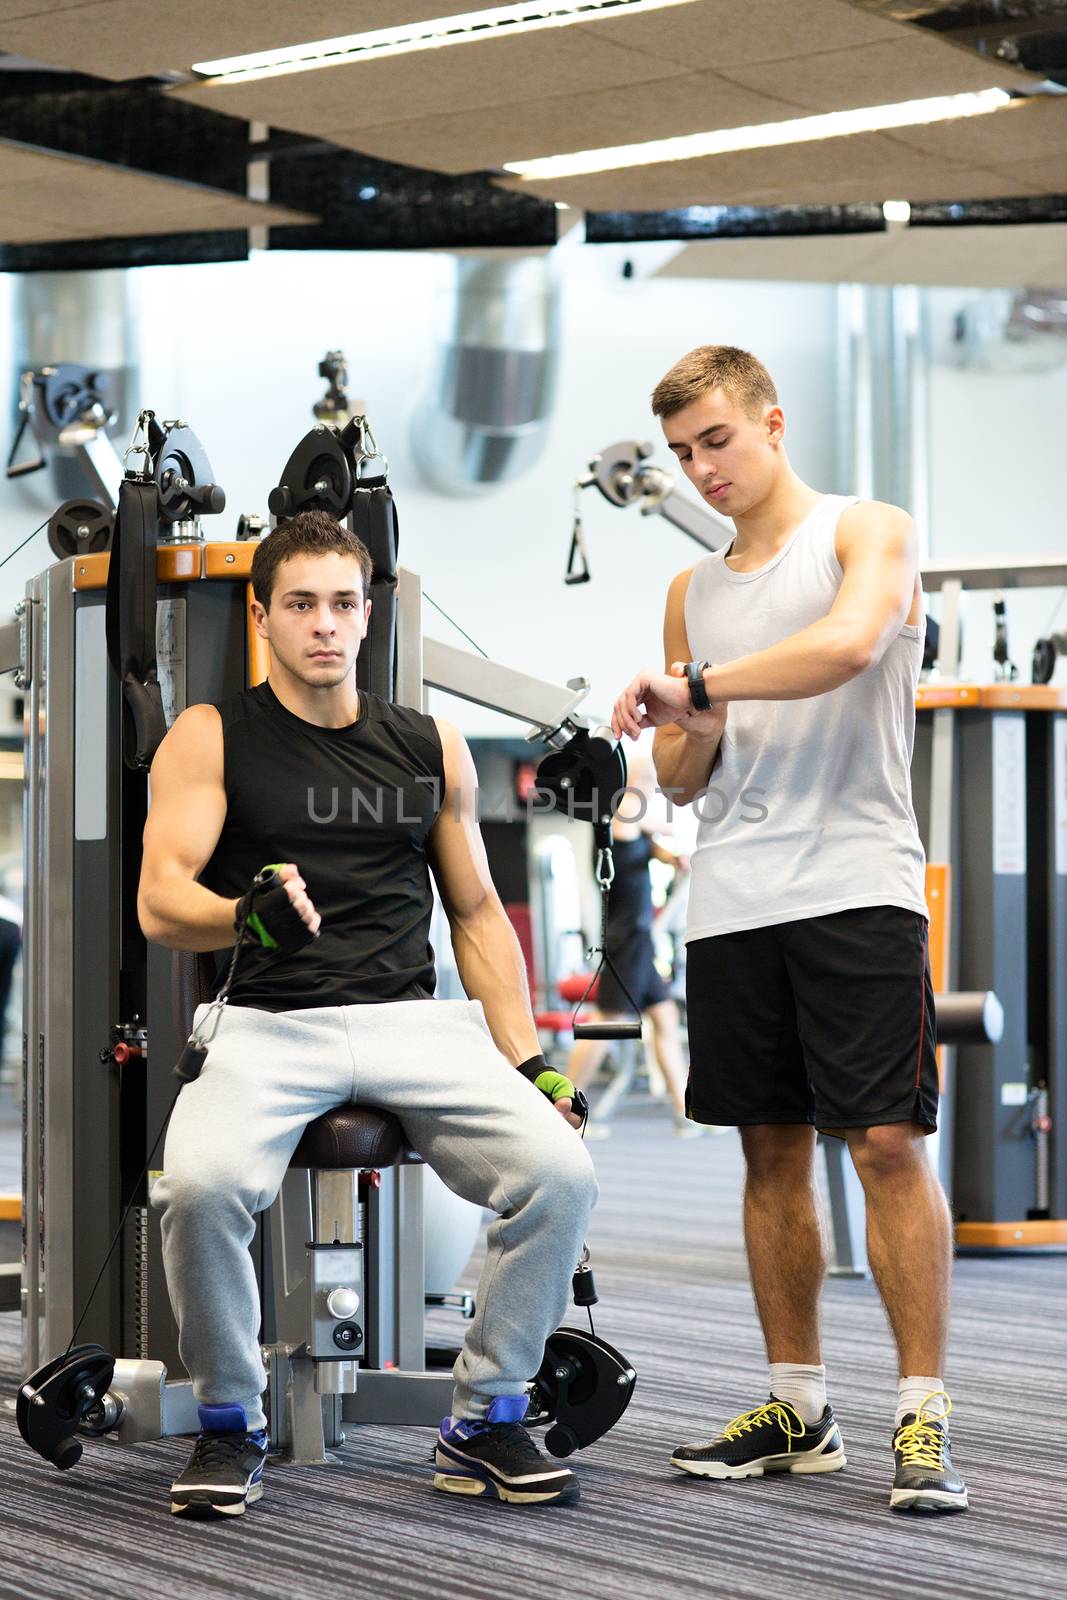 sport, fitness, equipment, lifestyle and people concept - men exercising on gym machine